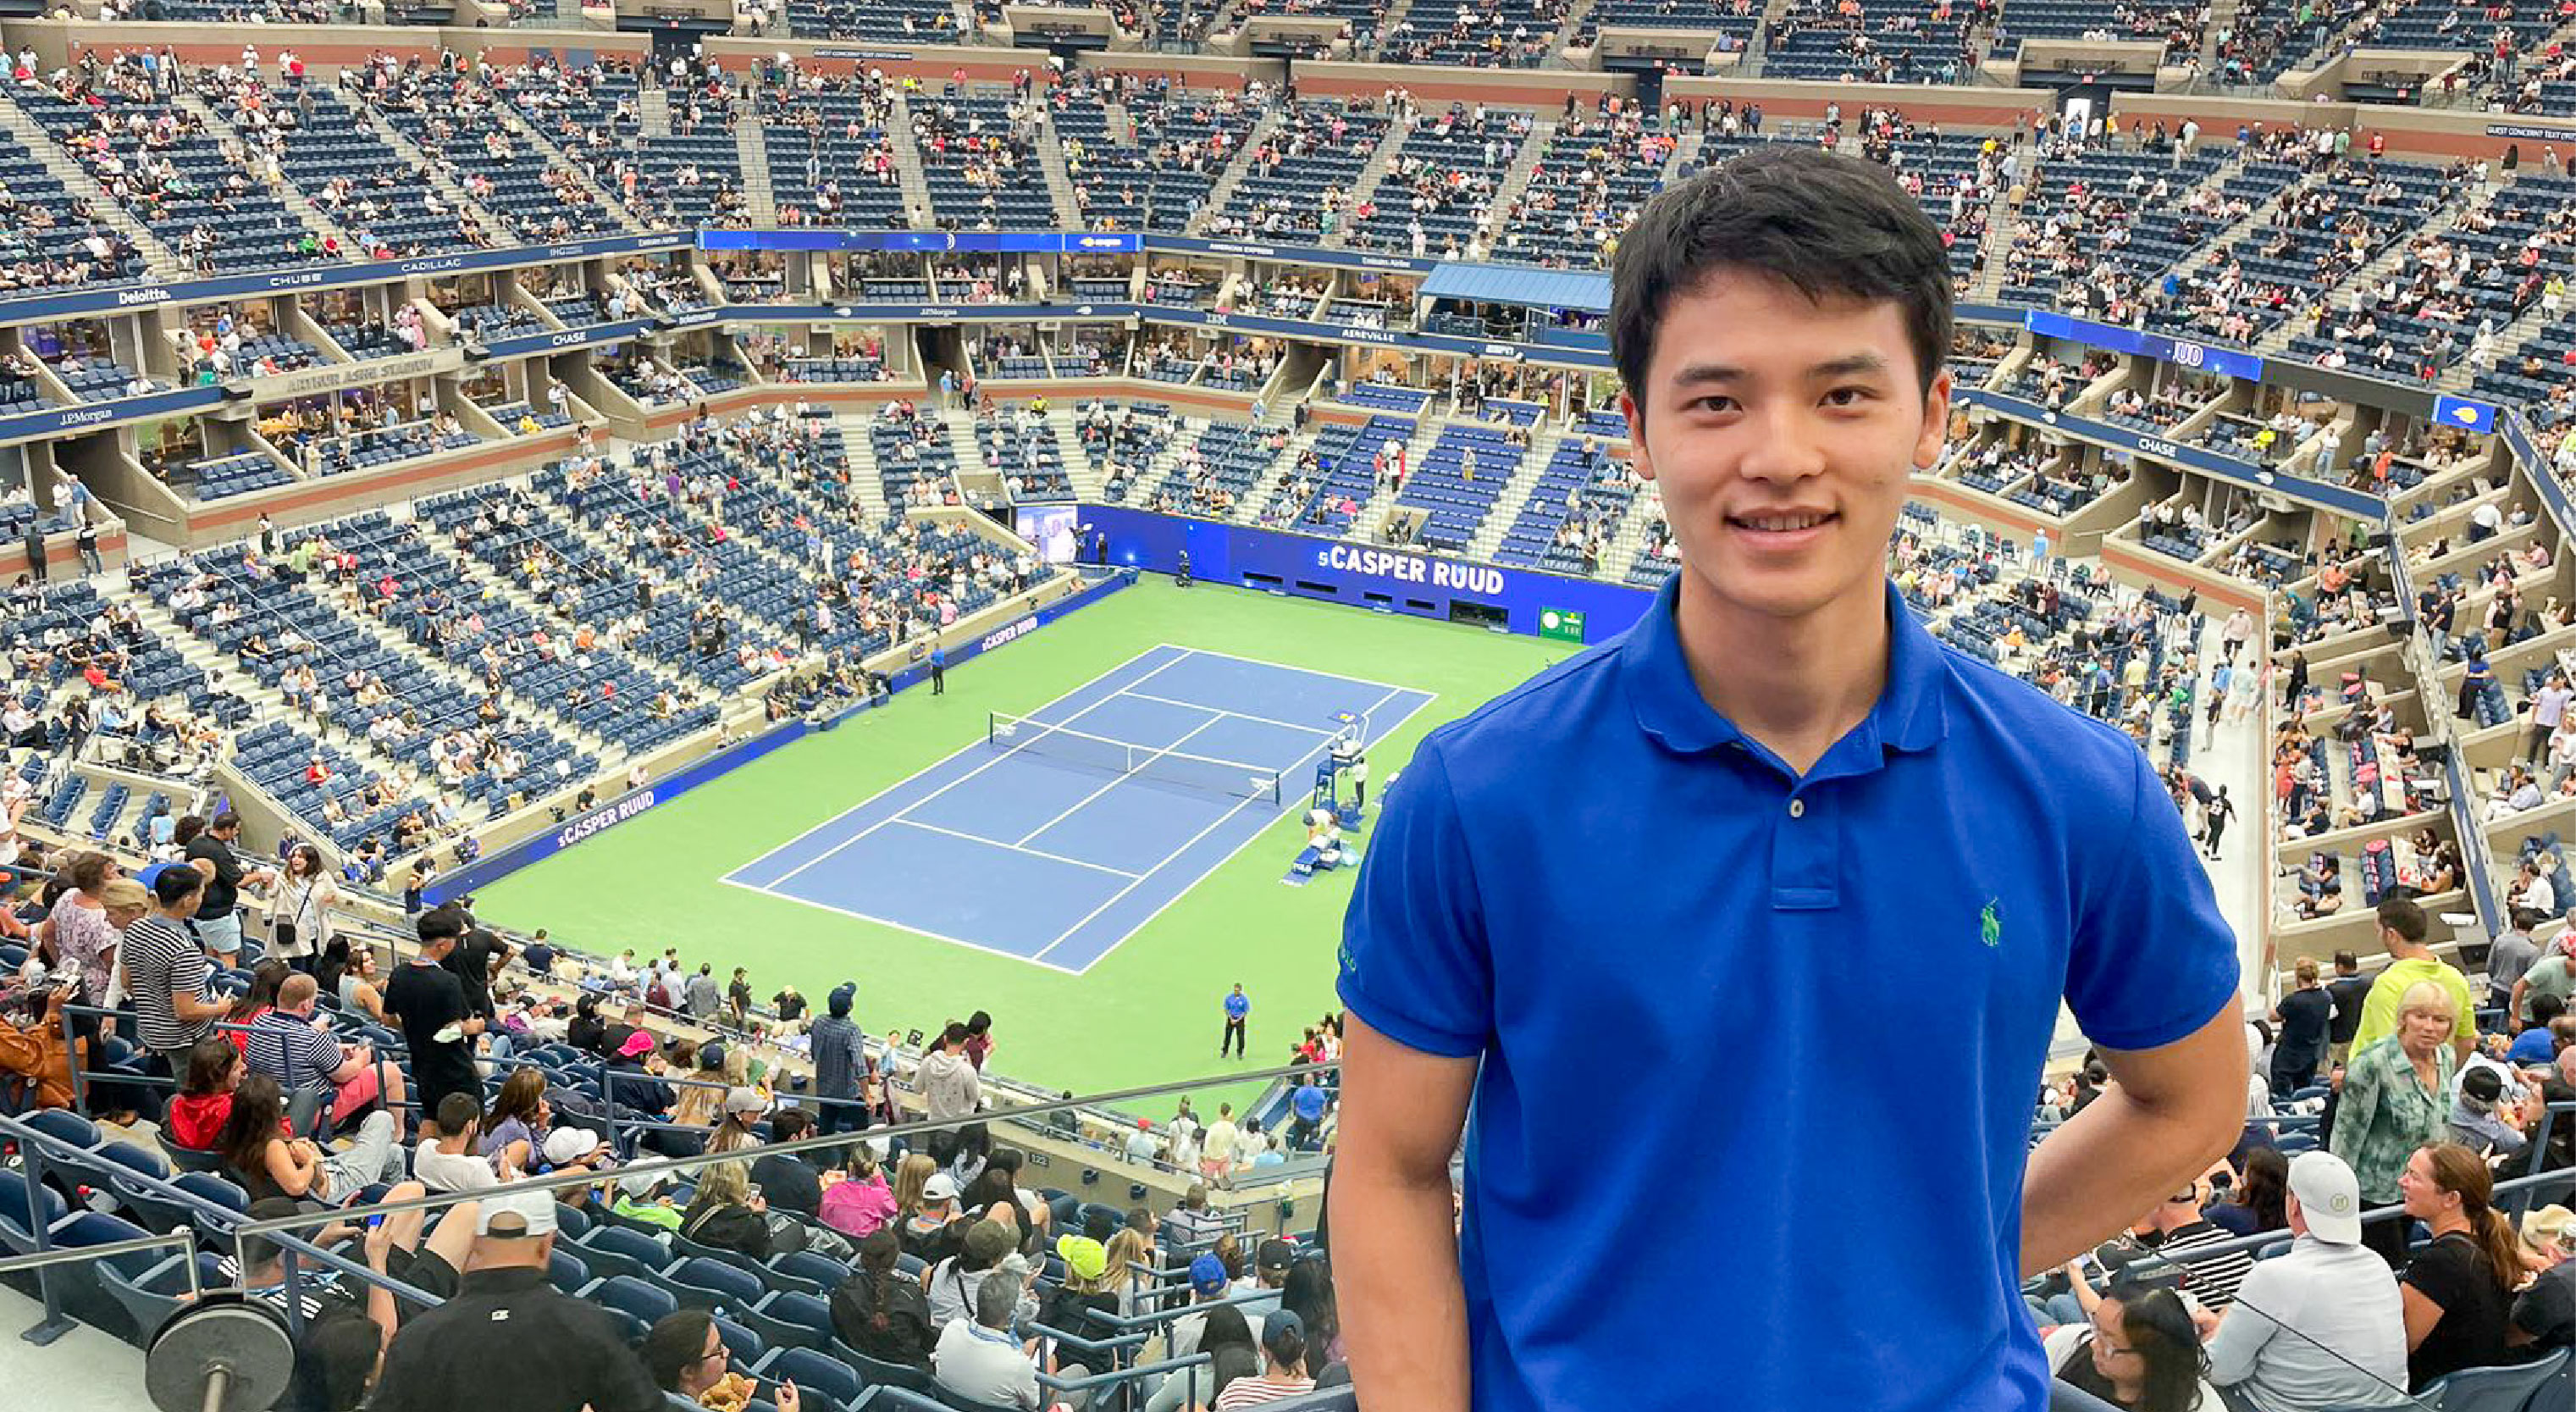 yang zhiheng standing in front of a tennis court